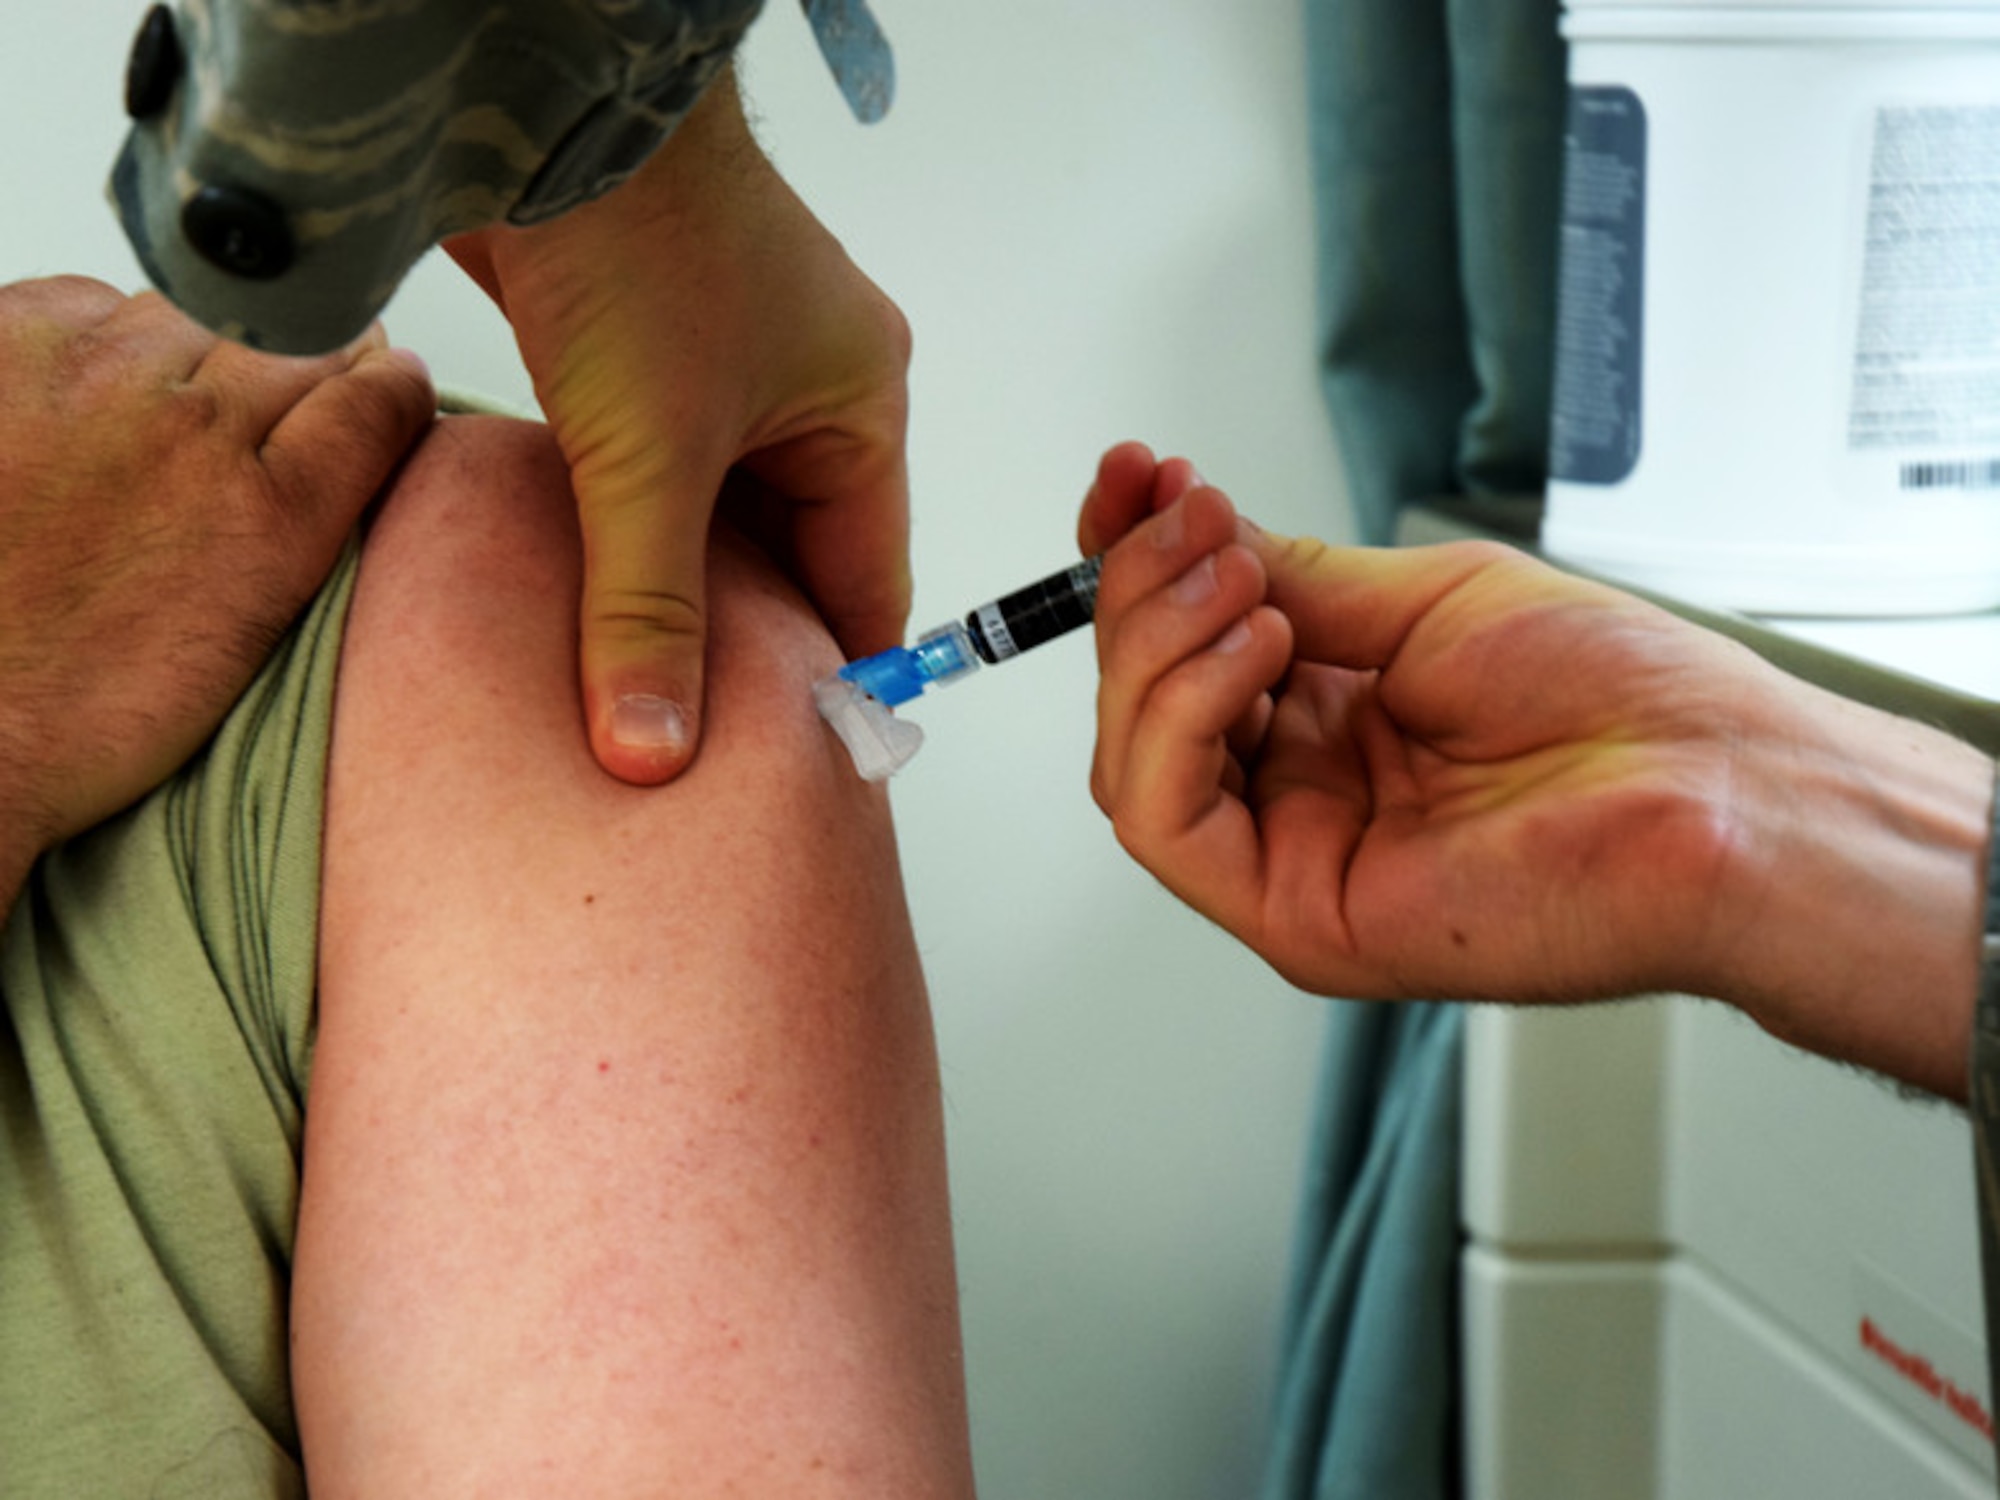 An Airman receives an influenza vaccination on Peterson Air Force Base, Colorado, Oct. 29, 2019. Vaccinations help prevent the spread on influenza and other infectious diseases. (U.S. Air Force photo by Griffin Swartzell)